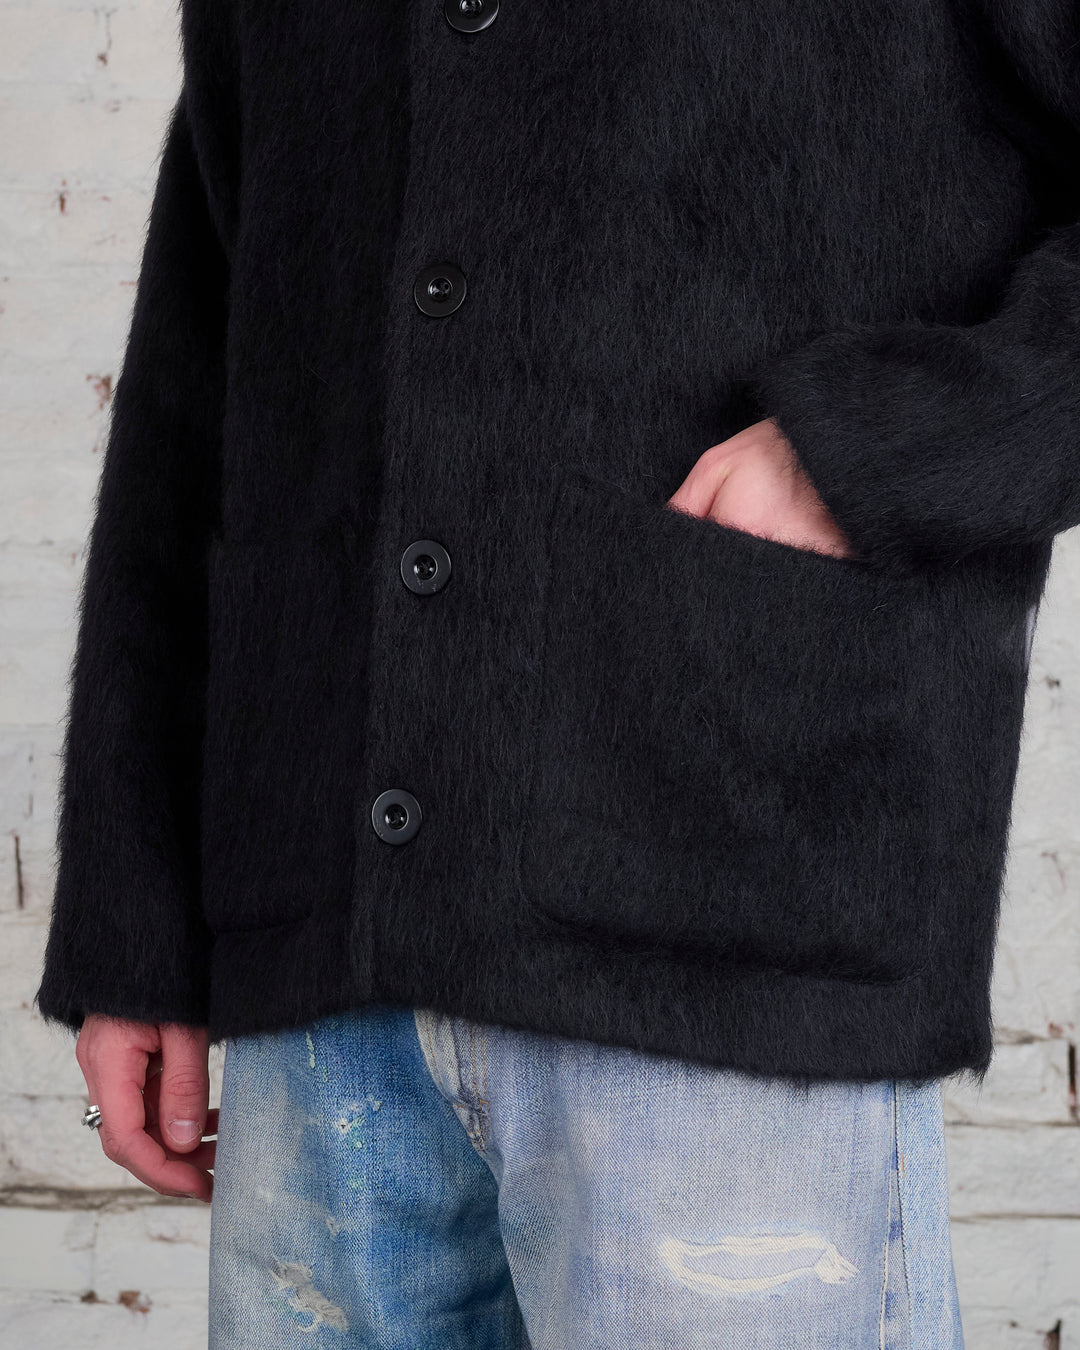 Our Legacy Cardigan Black Mohair